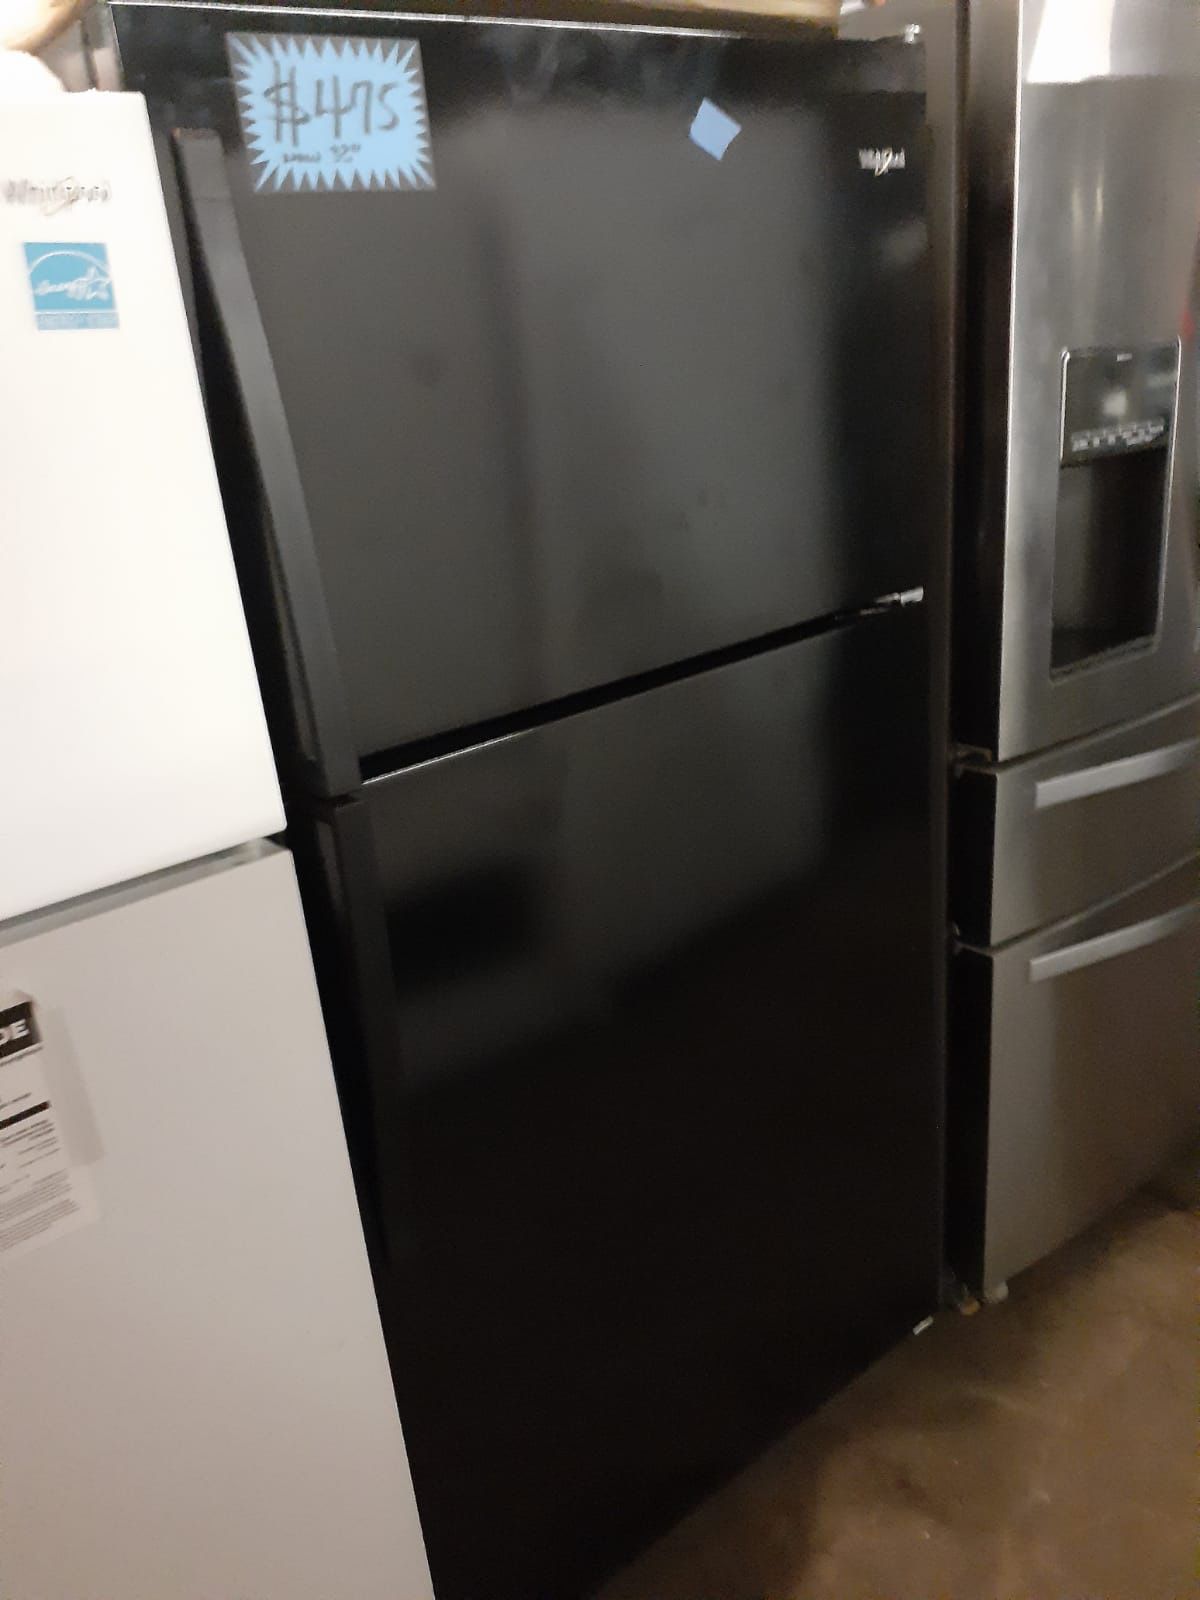 New WHIRLPOOL 33in. Top freezer refrigerator with 1yr. Manufacturer warranty